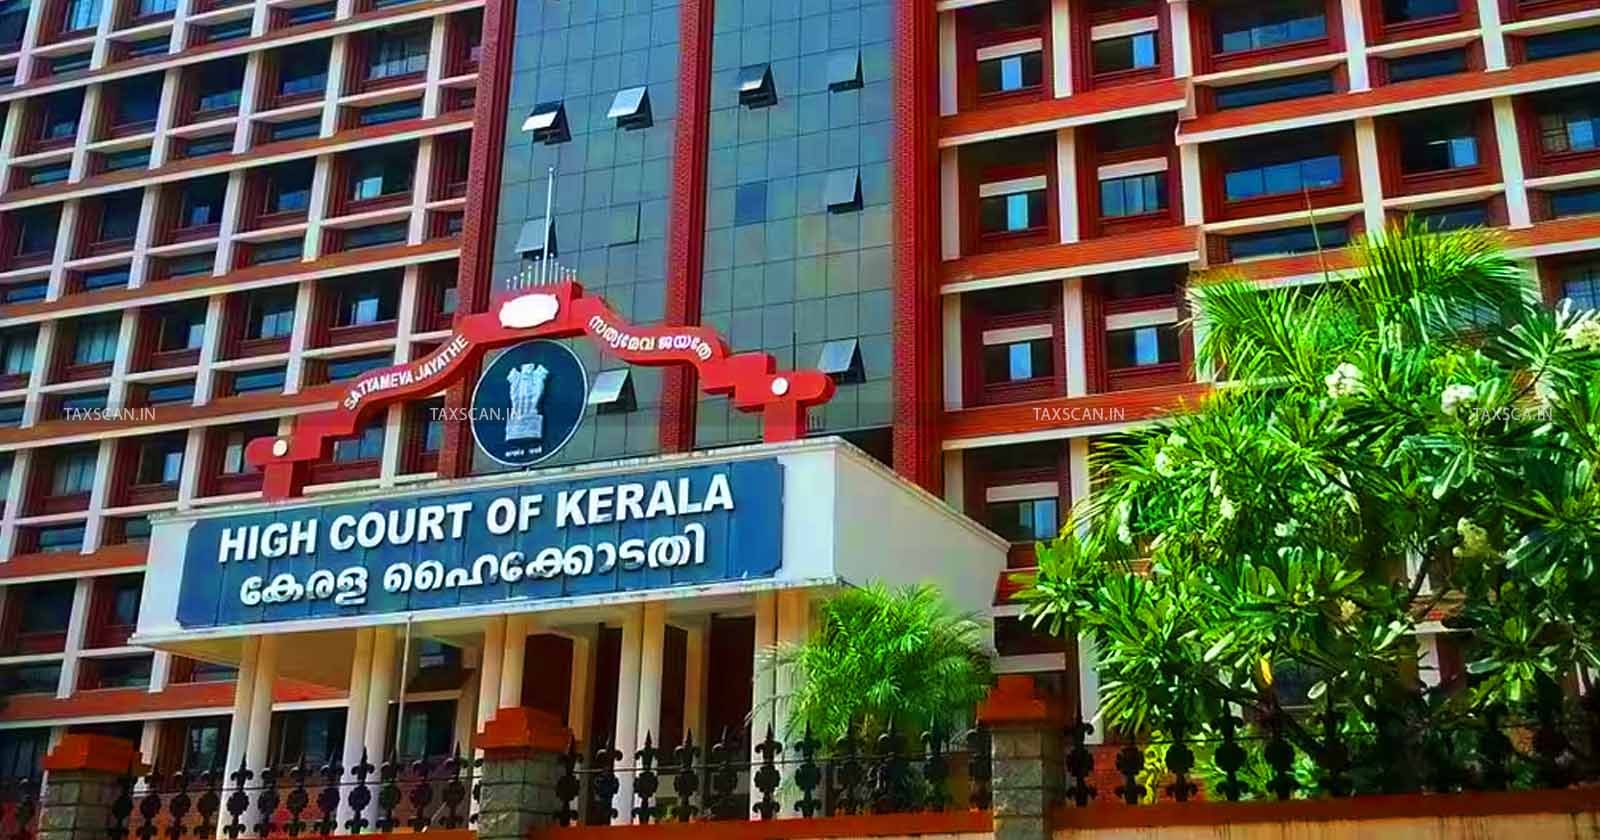 Kerala High Court - Excise duty recovery - ICICI Bank - Bank account attachment case - taxscan